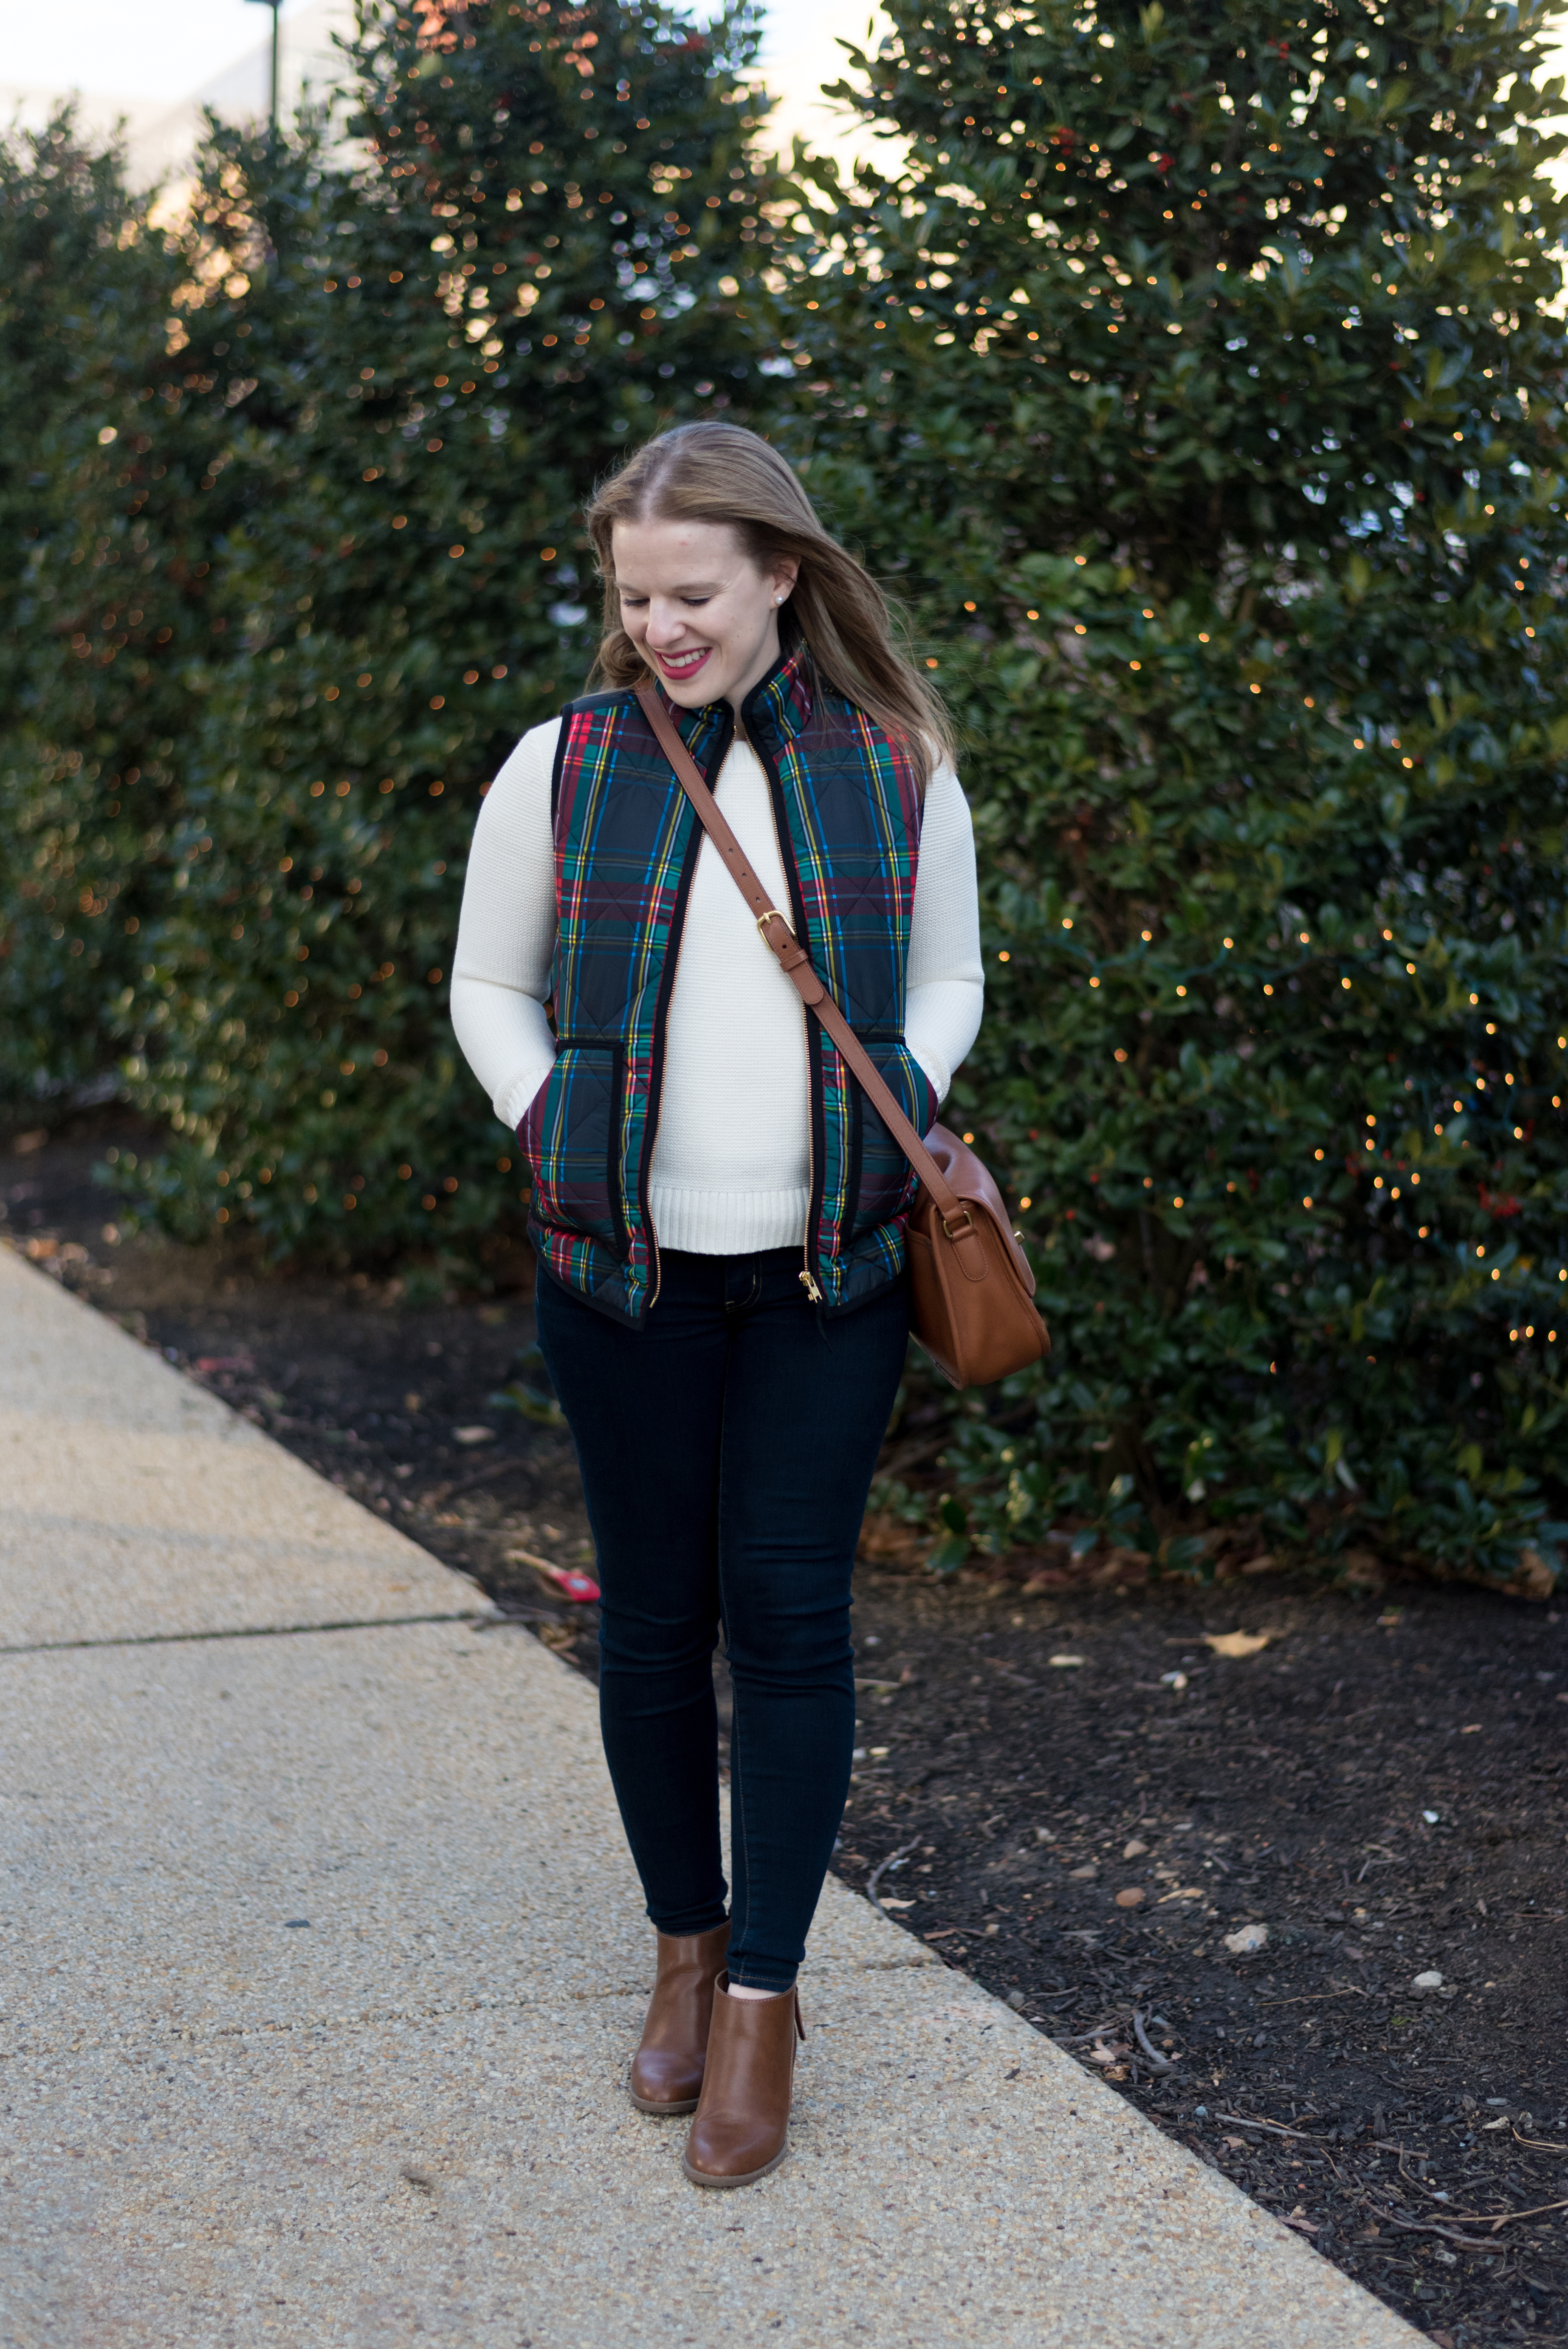 My 2018 Word of the Year, a Reader Survey, AND Giveaway (oh my!) | Something Good, @danaerinw , winter style, cold weather looks, vests, women's vests, cream sweaters, crossbody bags, women's plaid vests, dark jeggings, cognac booties, waffle knit sweater